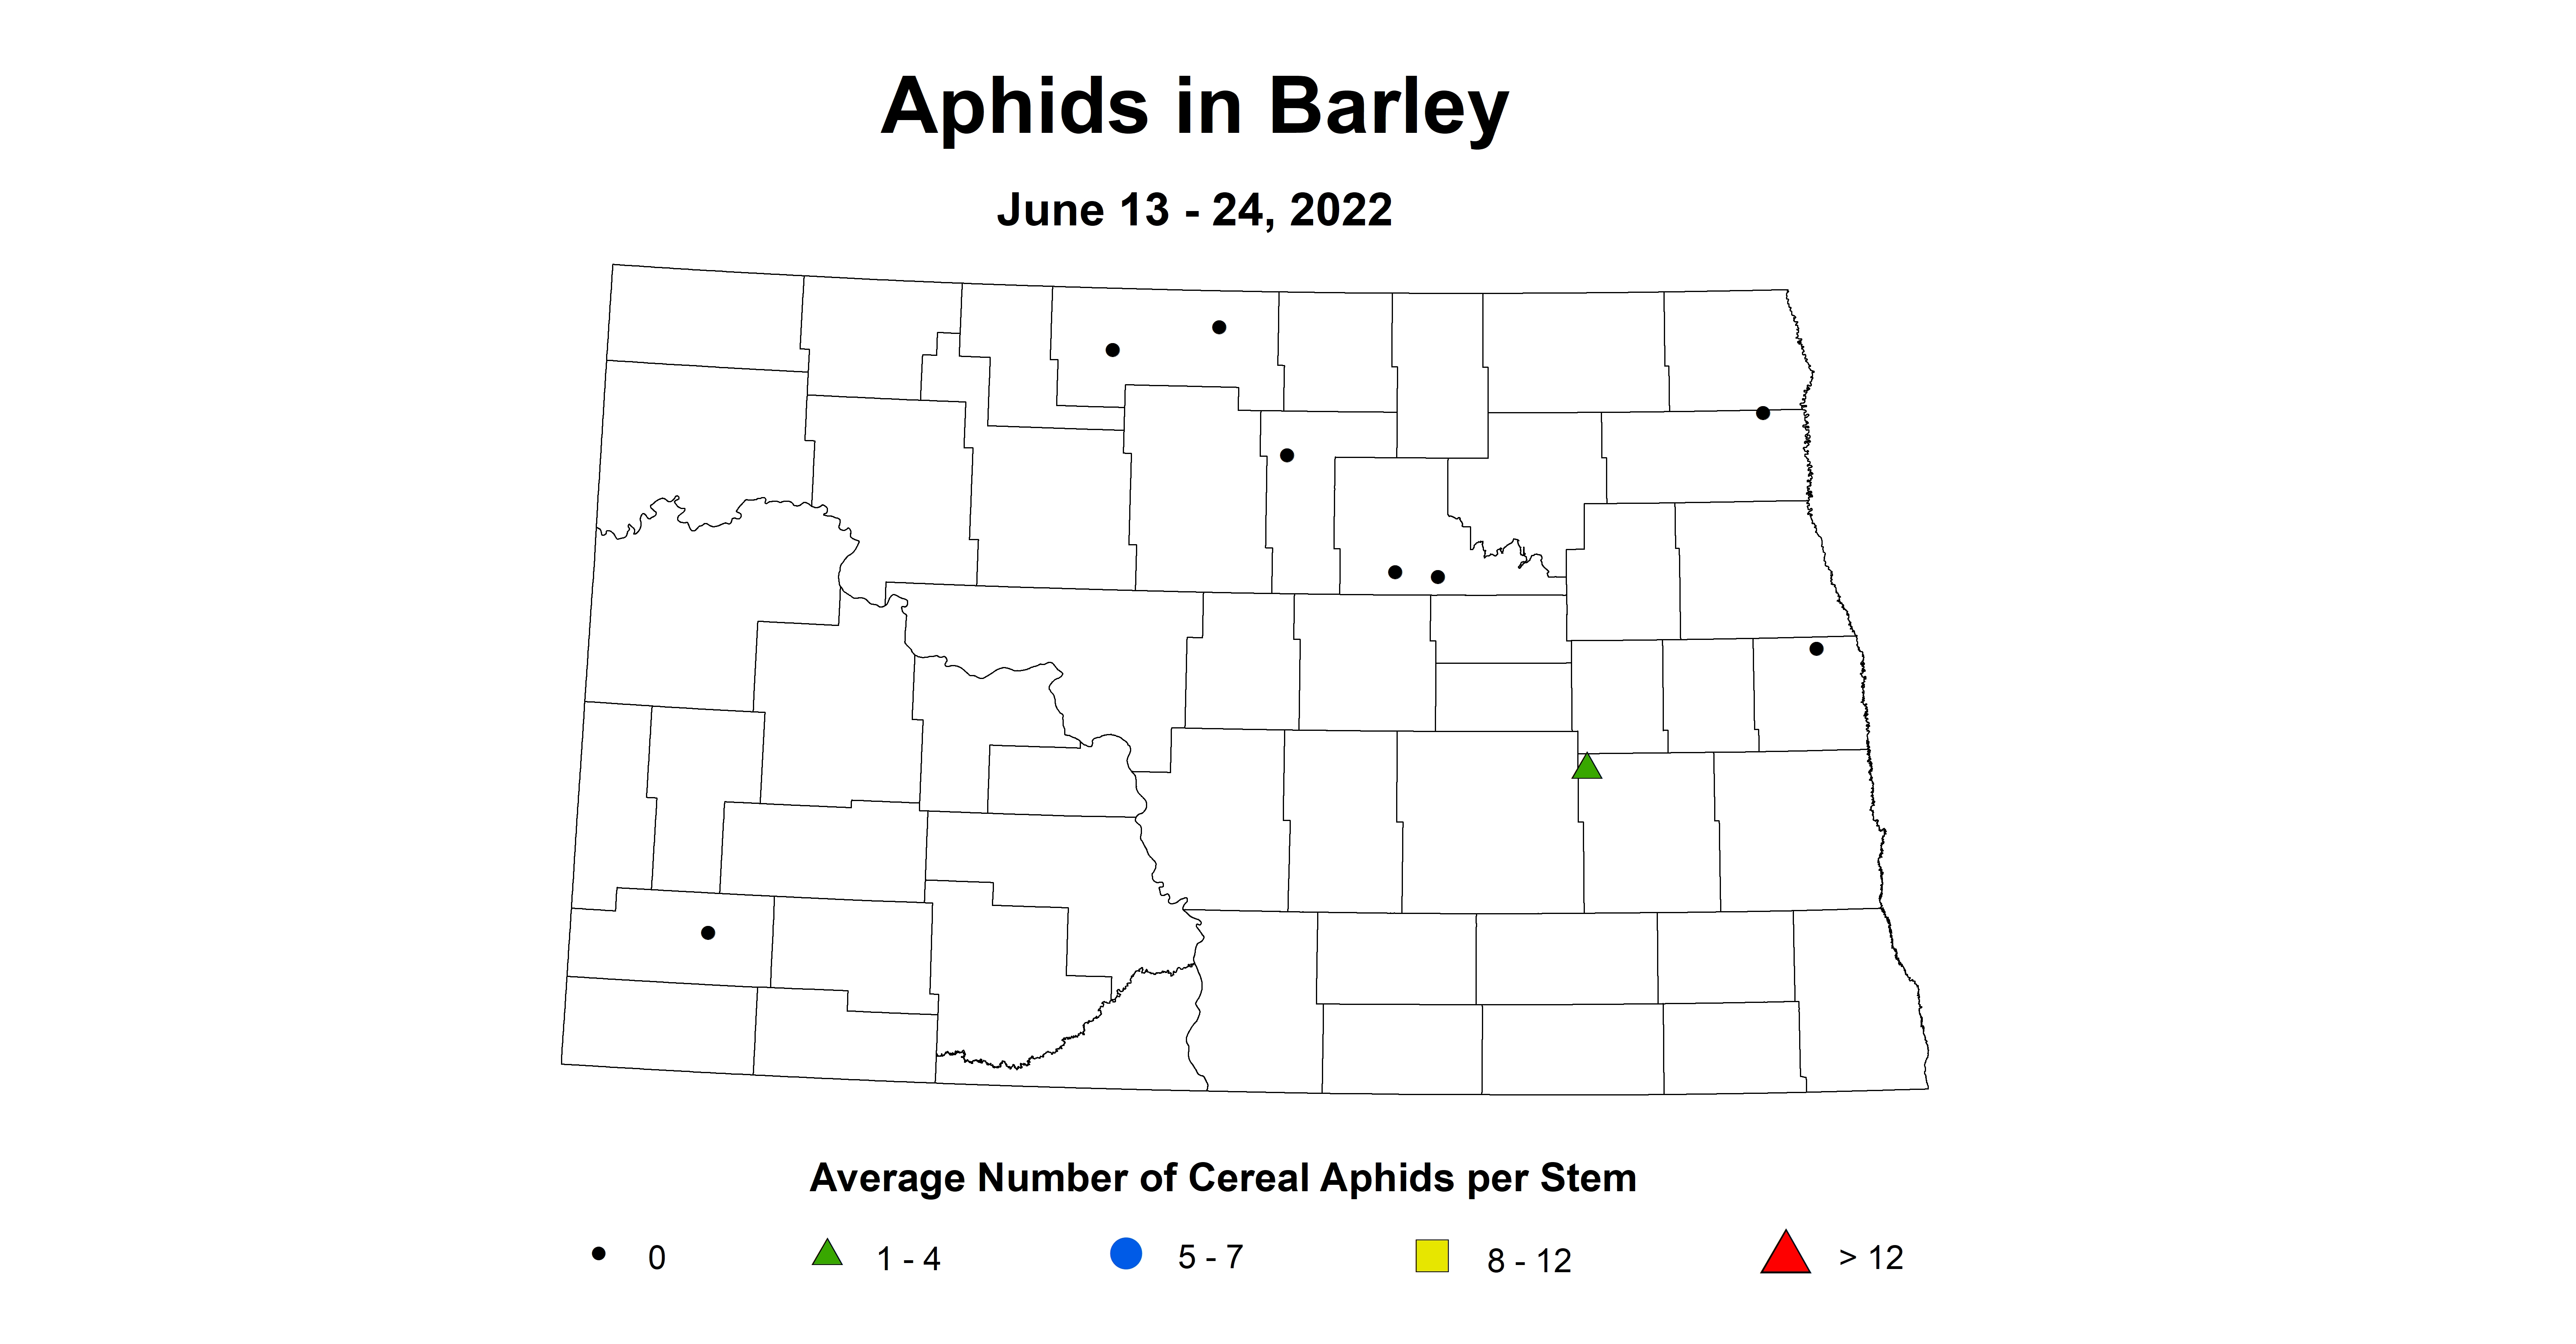 ND IPM map of Barley Aphids June 13-24, 2022